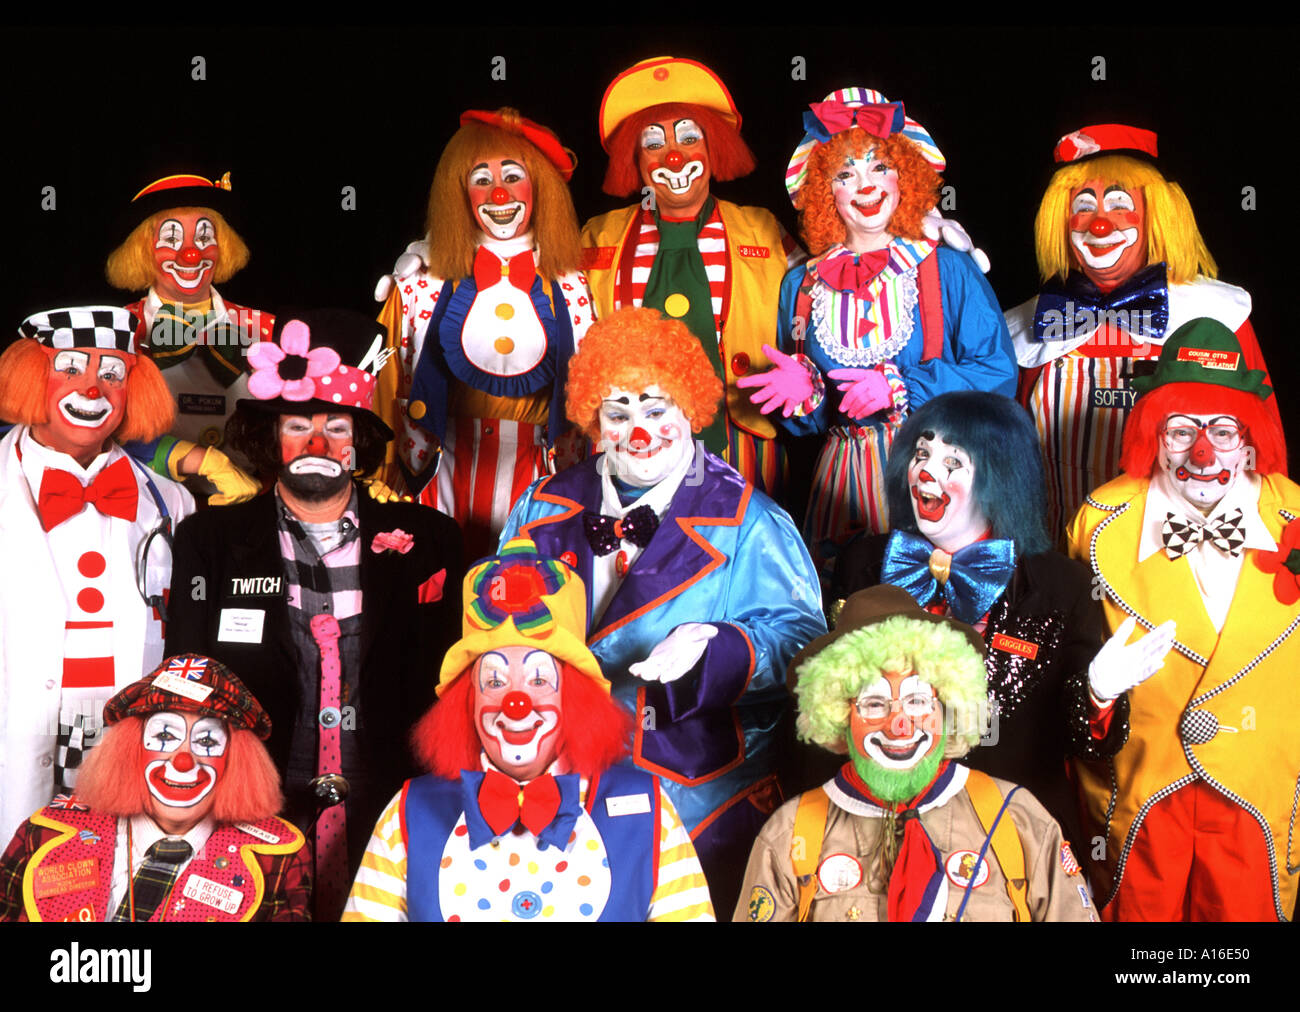 group-portrait-of-clowns-all-colorful-and-happy-A16E50.jpg